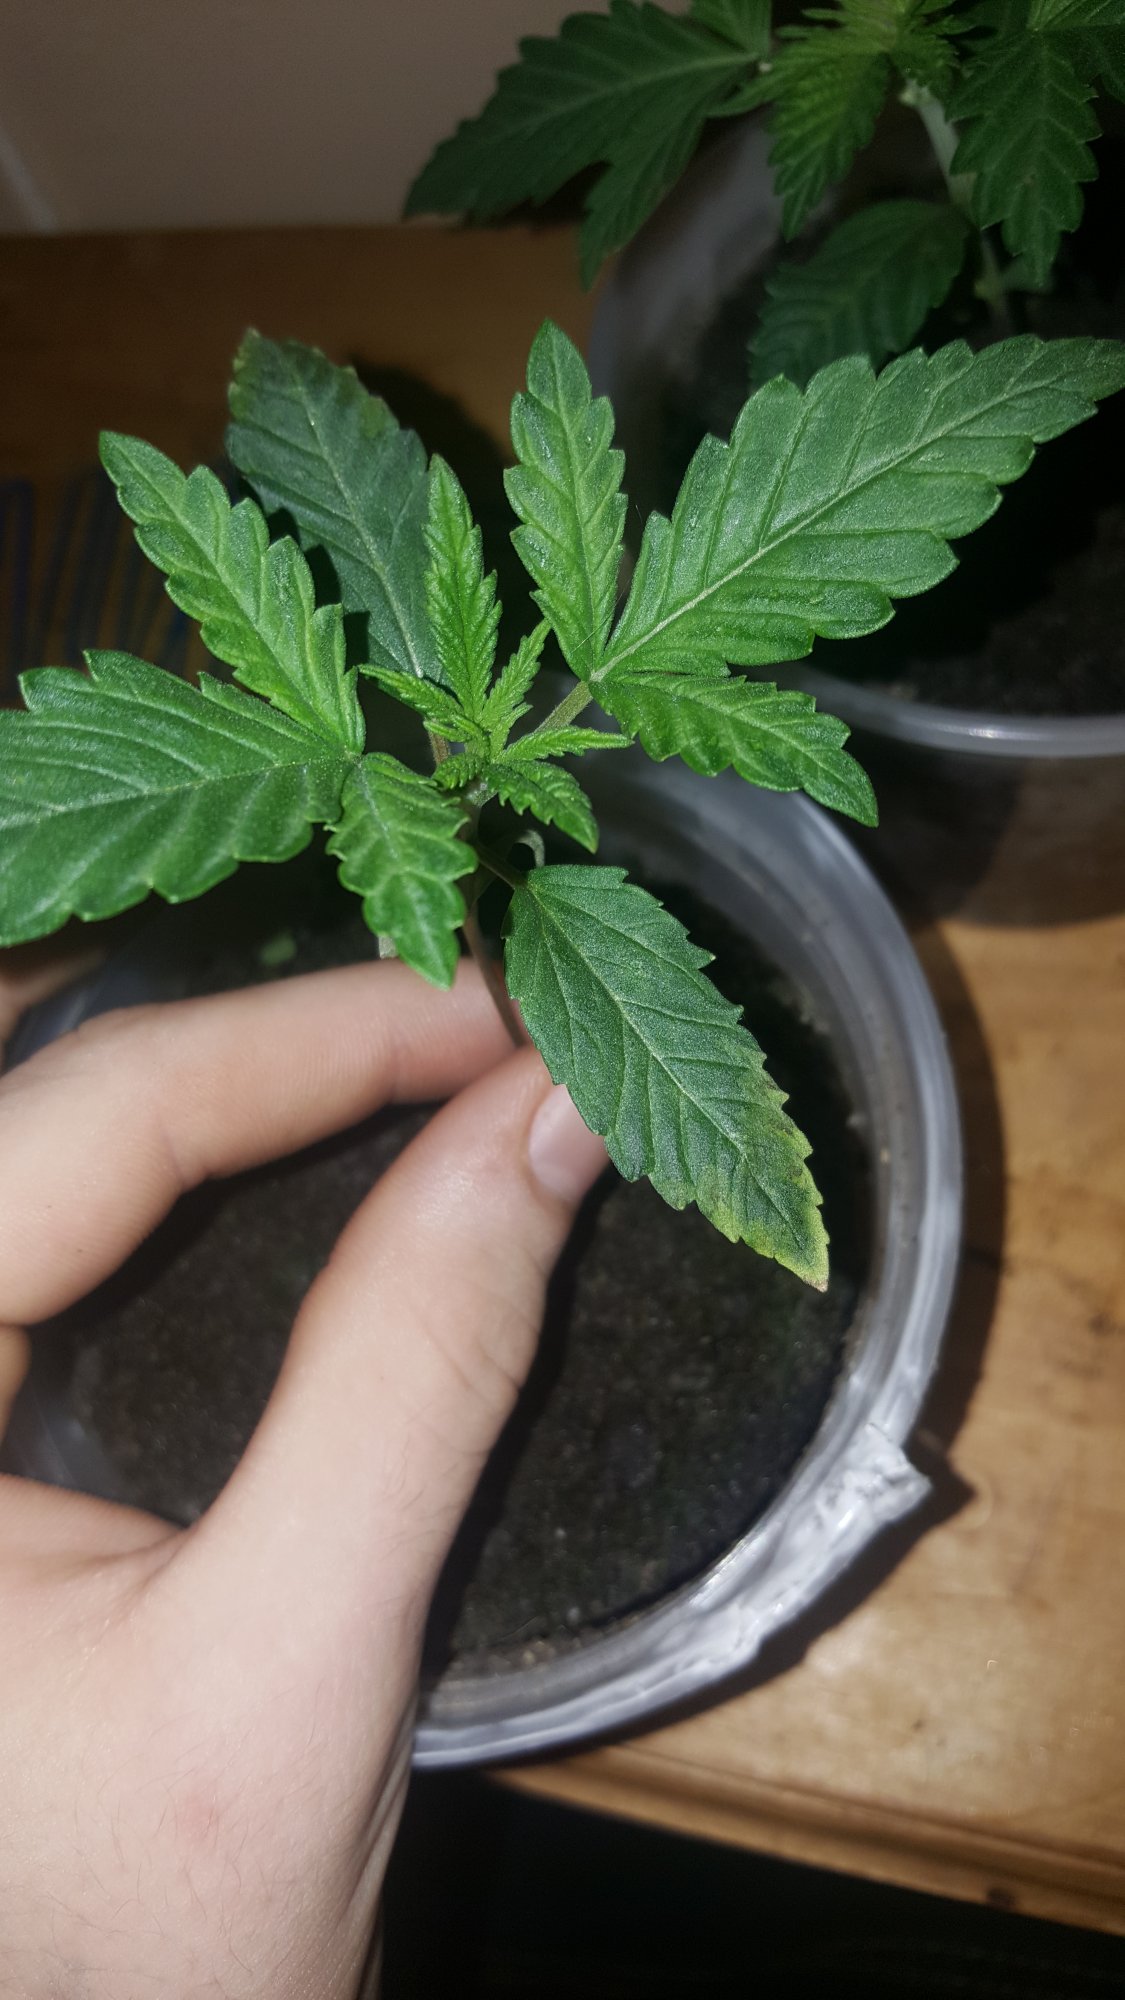 What is this first time grower